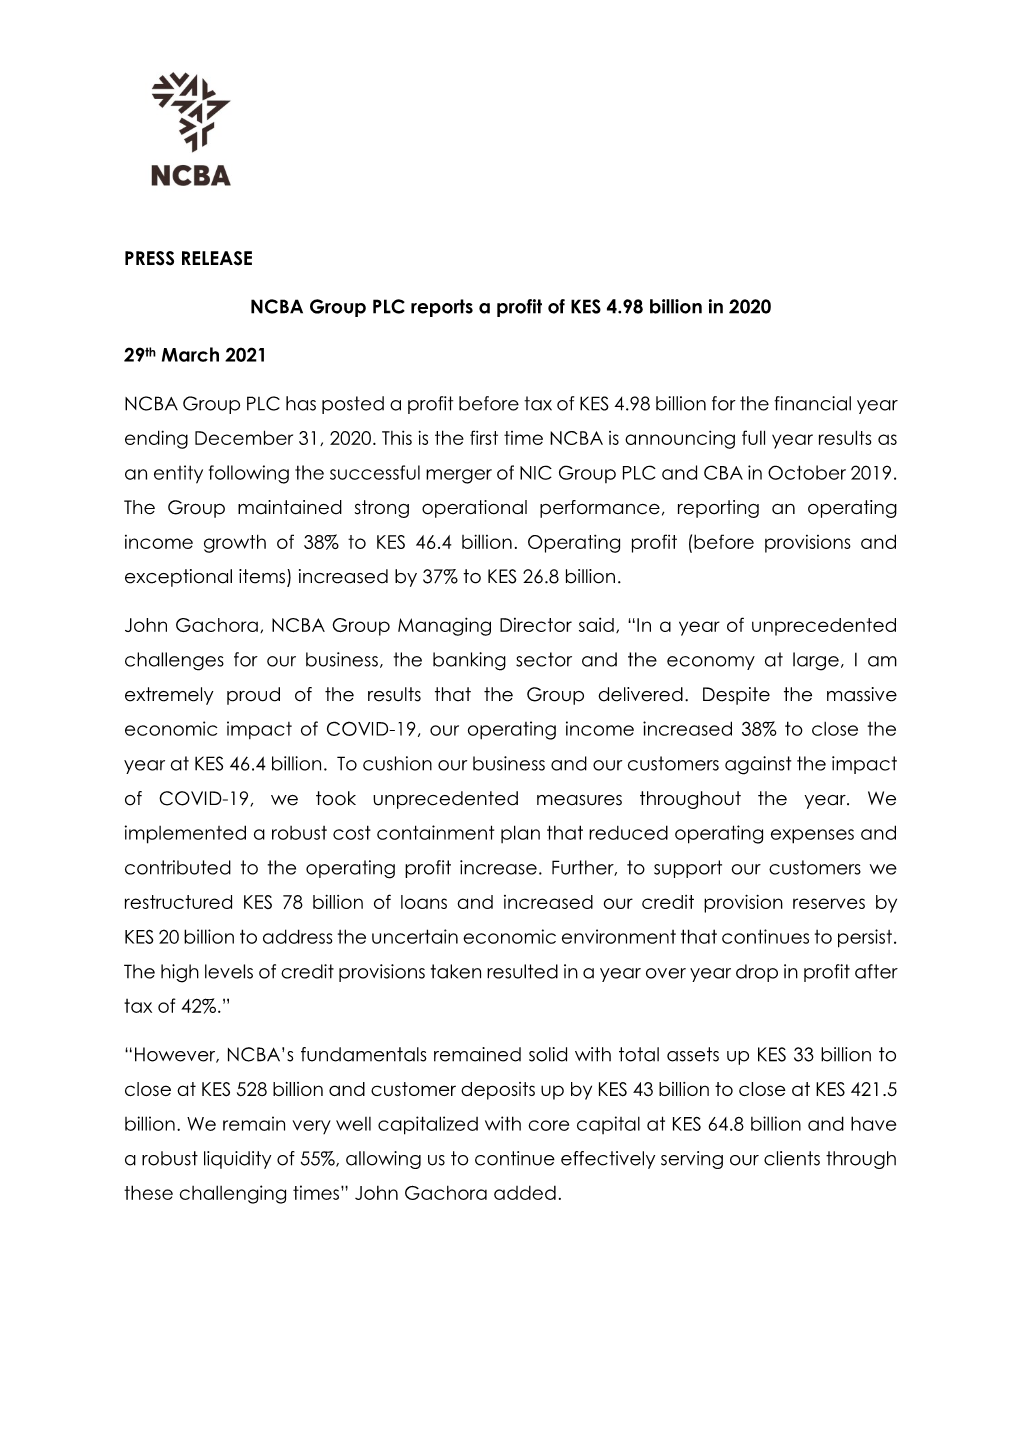 PRESS RELEASE NCBA Group PLC Reports